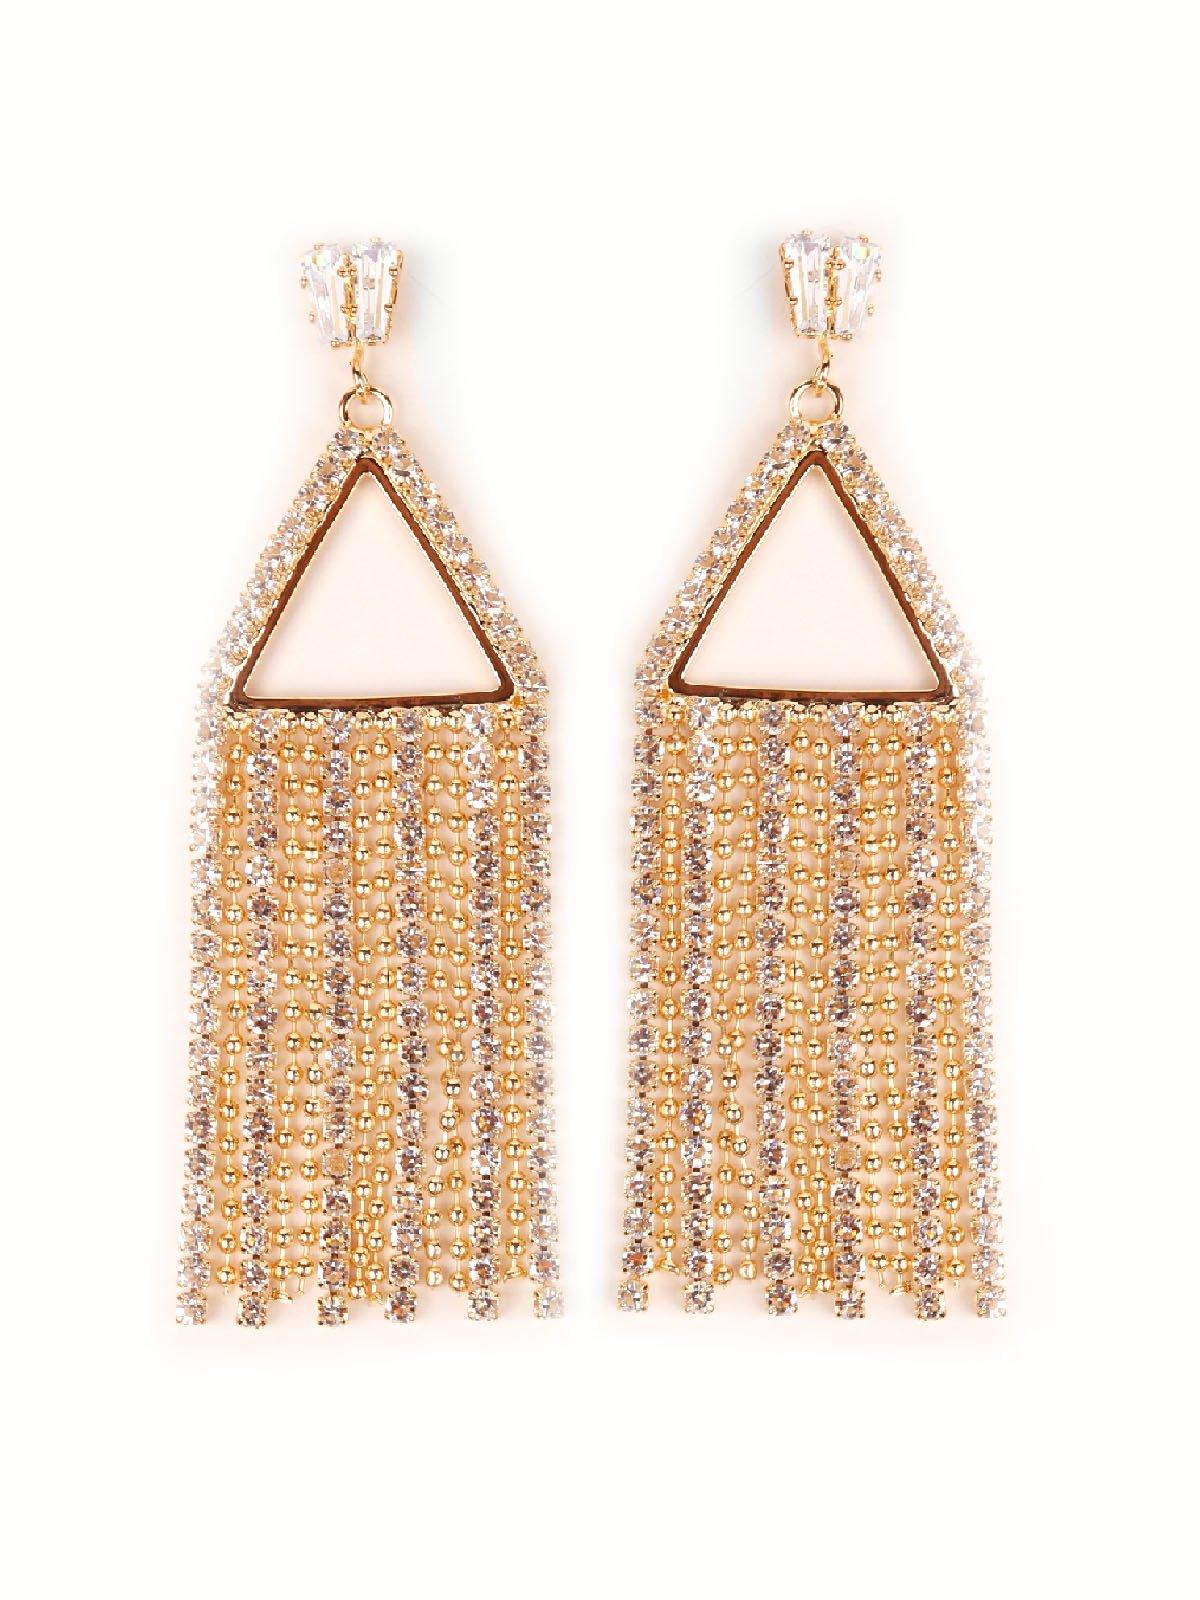 Buy Gold Toned Handcrafted Metal Earrings | DGED21009/DST4 | The loom